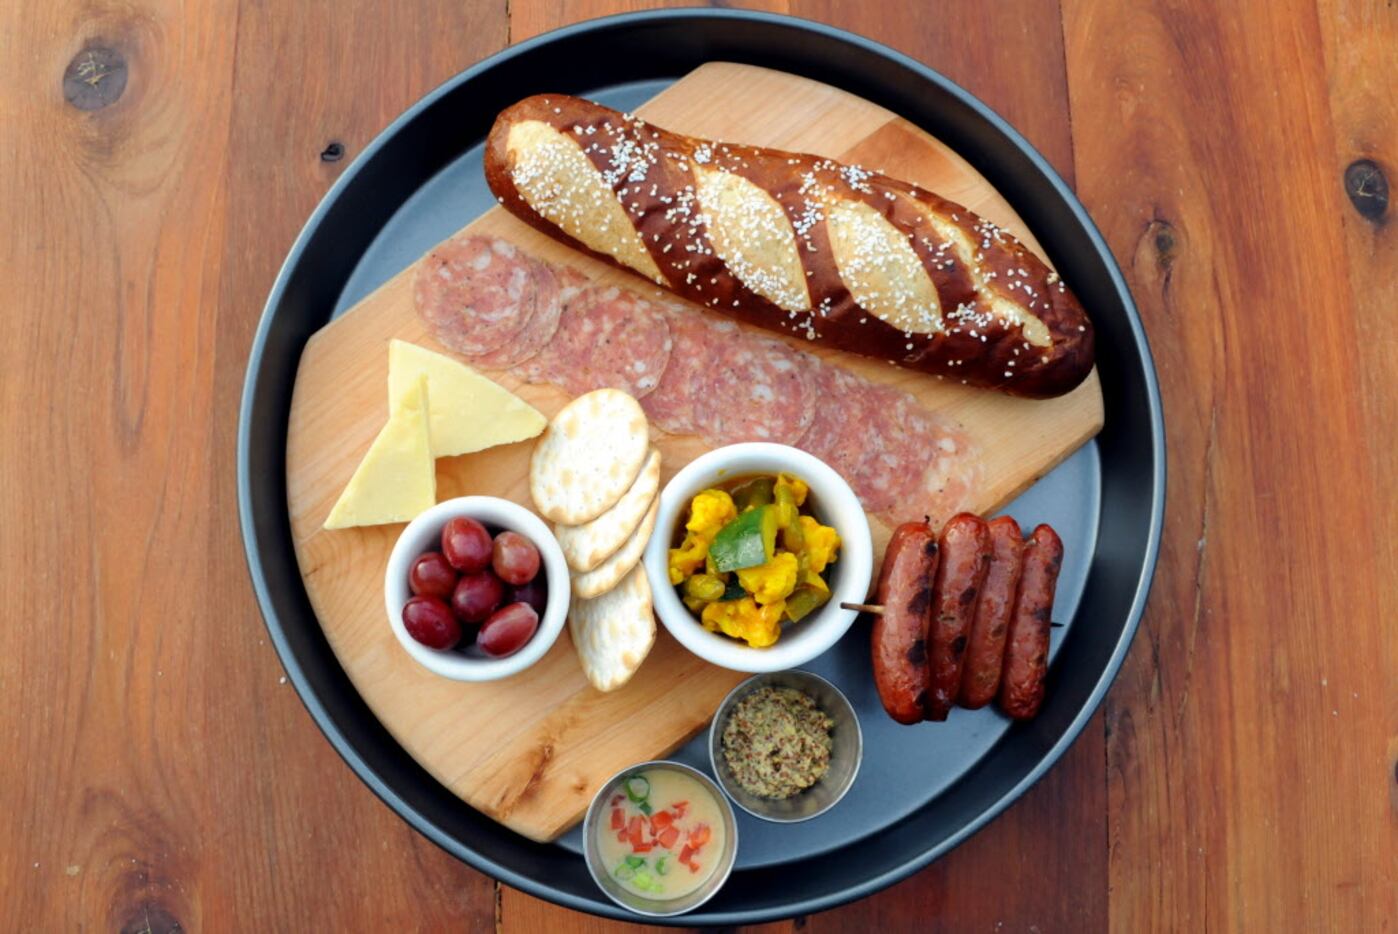 The beer companion features jalapeno-cheese brats, Milano salami, Quickes English cheddar,...